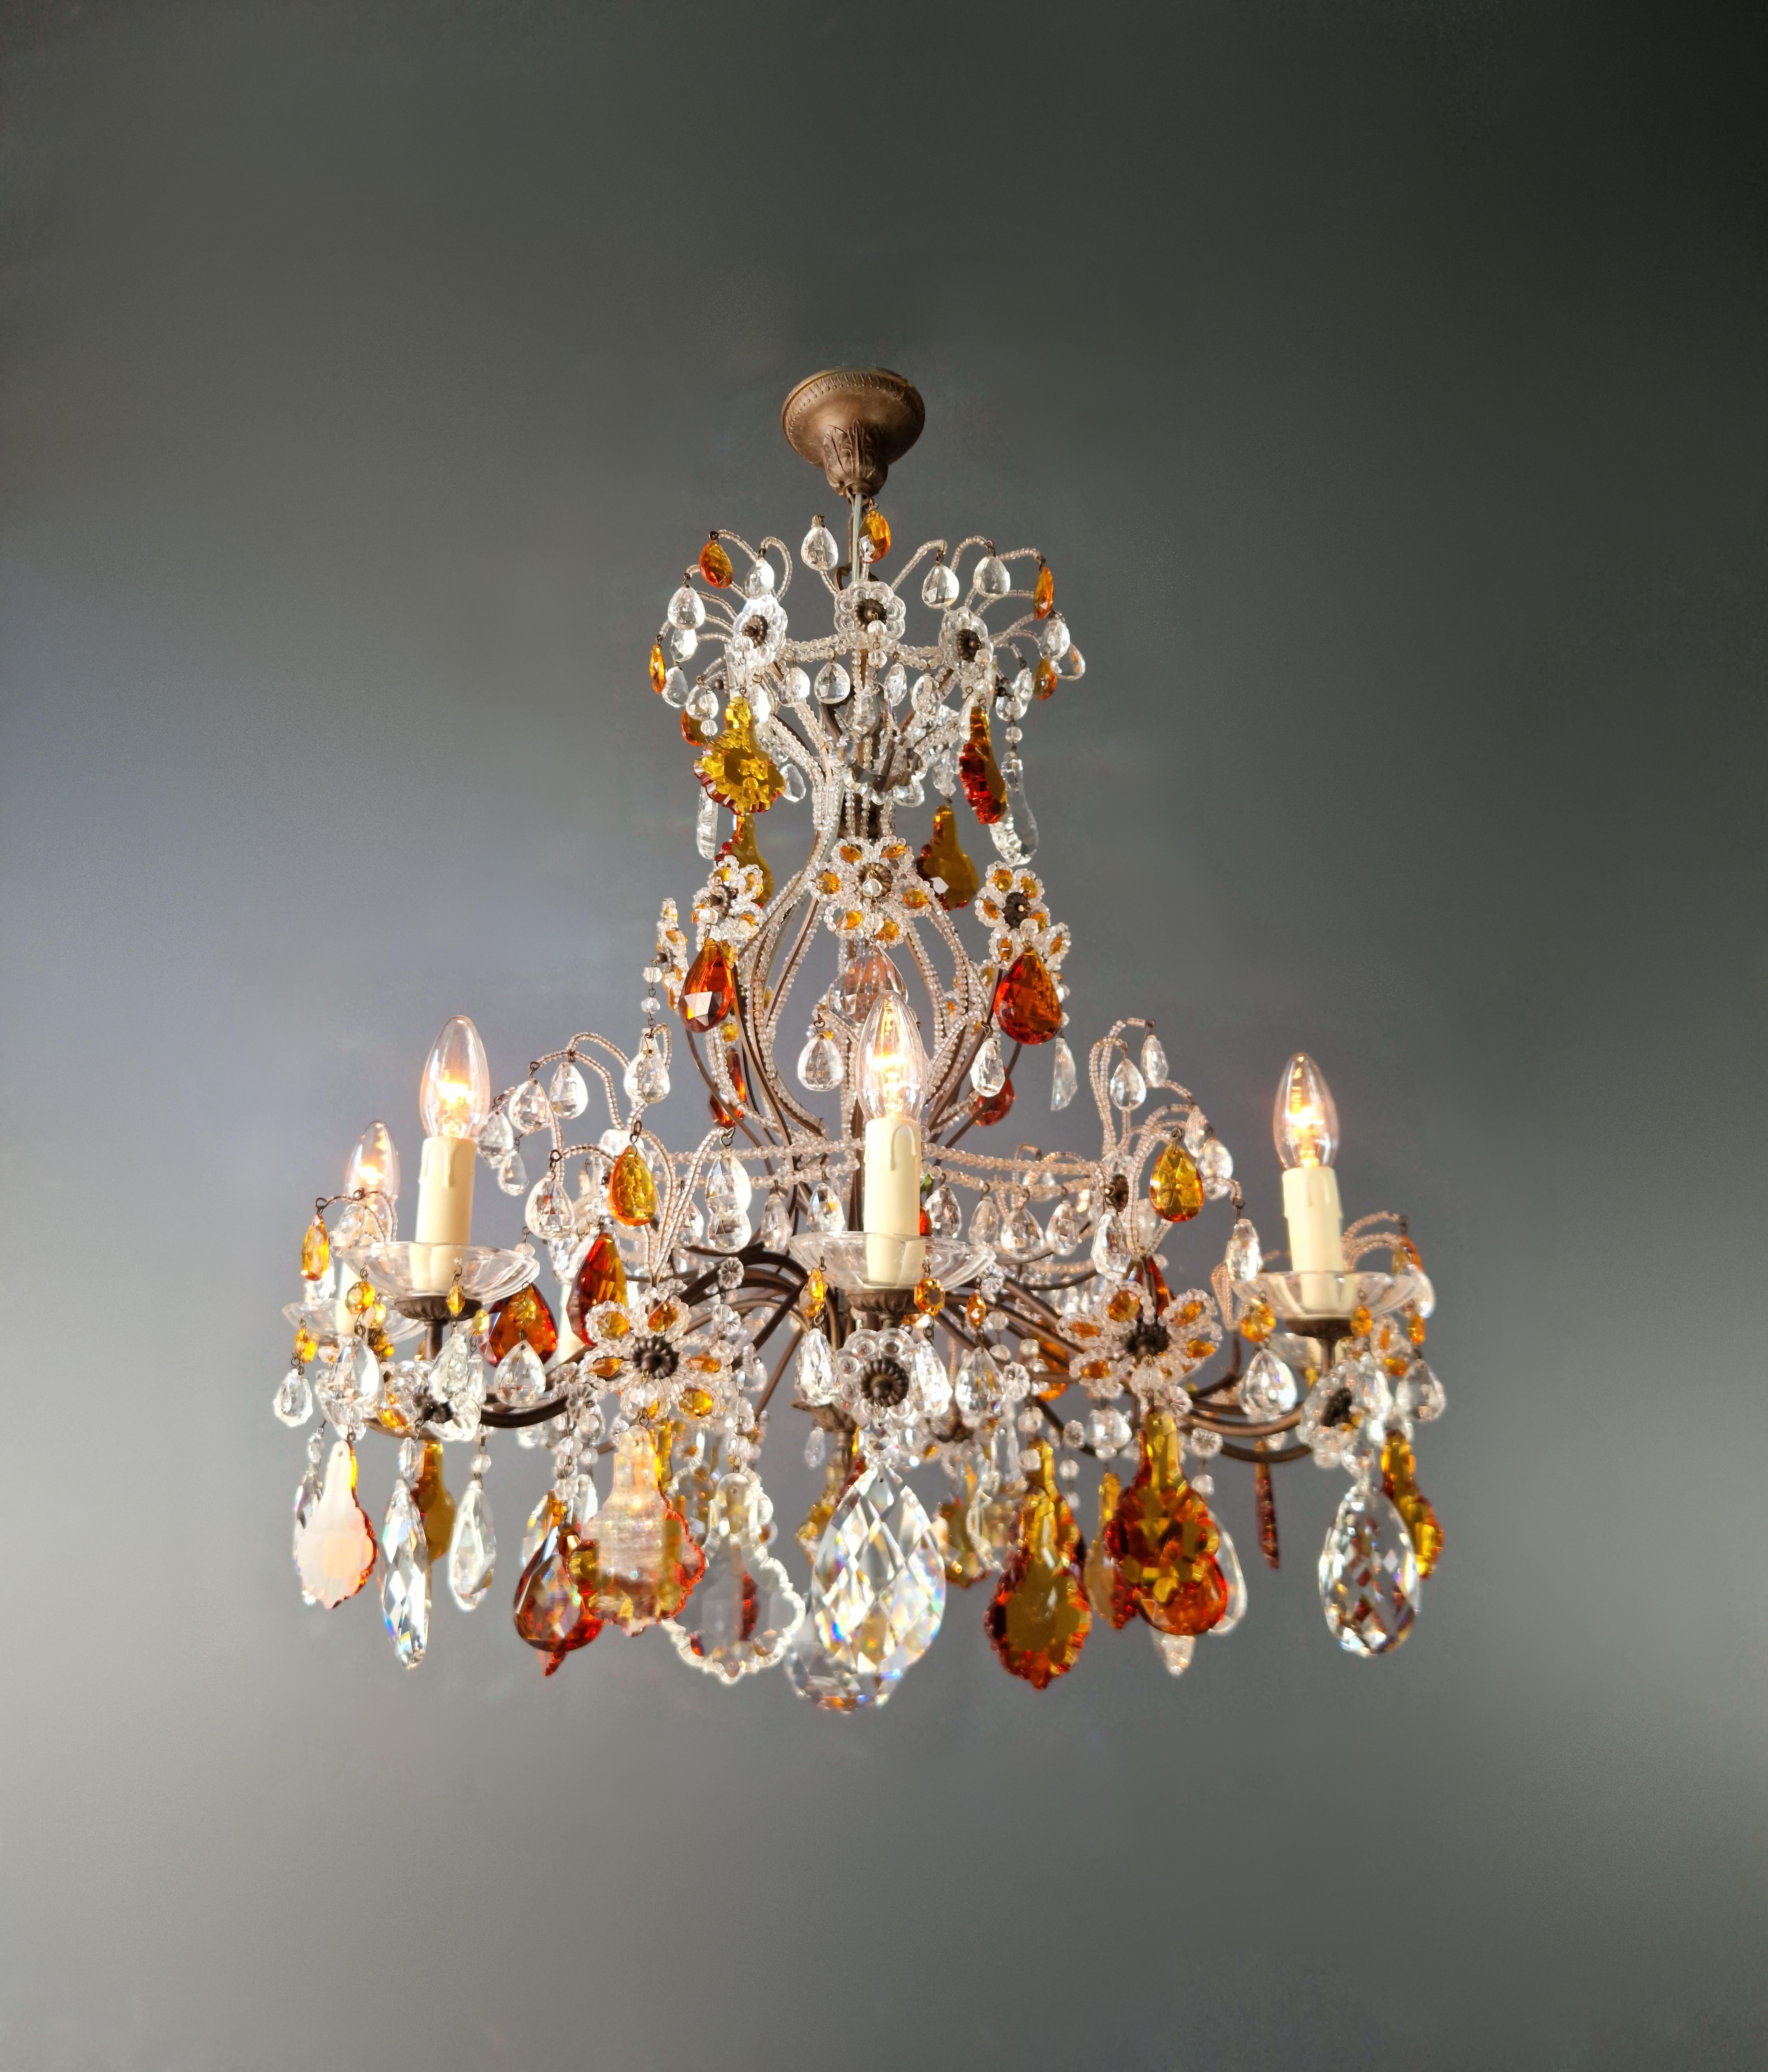 Elegant Vintage Chandelier: A Testament to Craftsmanship and Grace

Behold the splendor of the past revitalized in our meticulously restored old chandelier, a true masterpiece that encapsulates the zenith of Art Deco design. With utmost care and